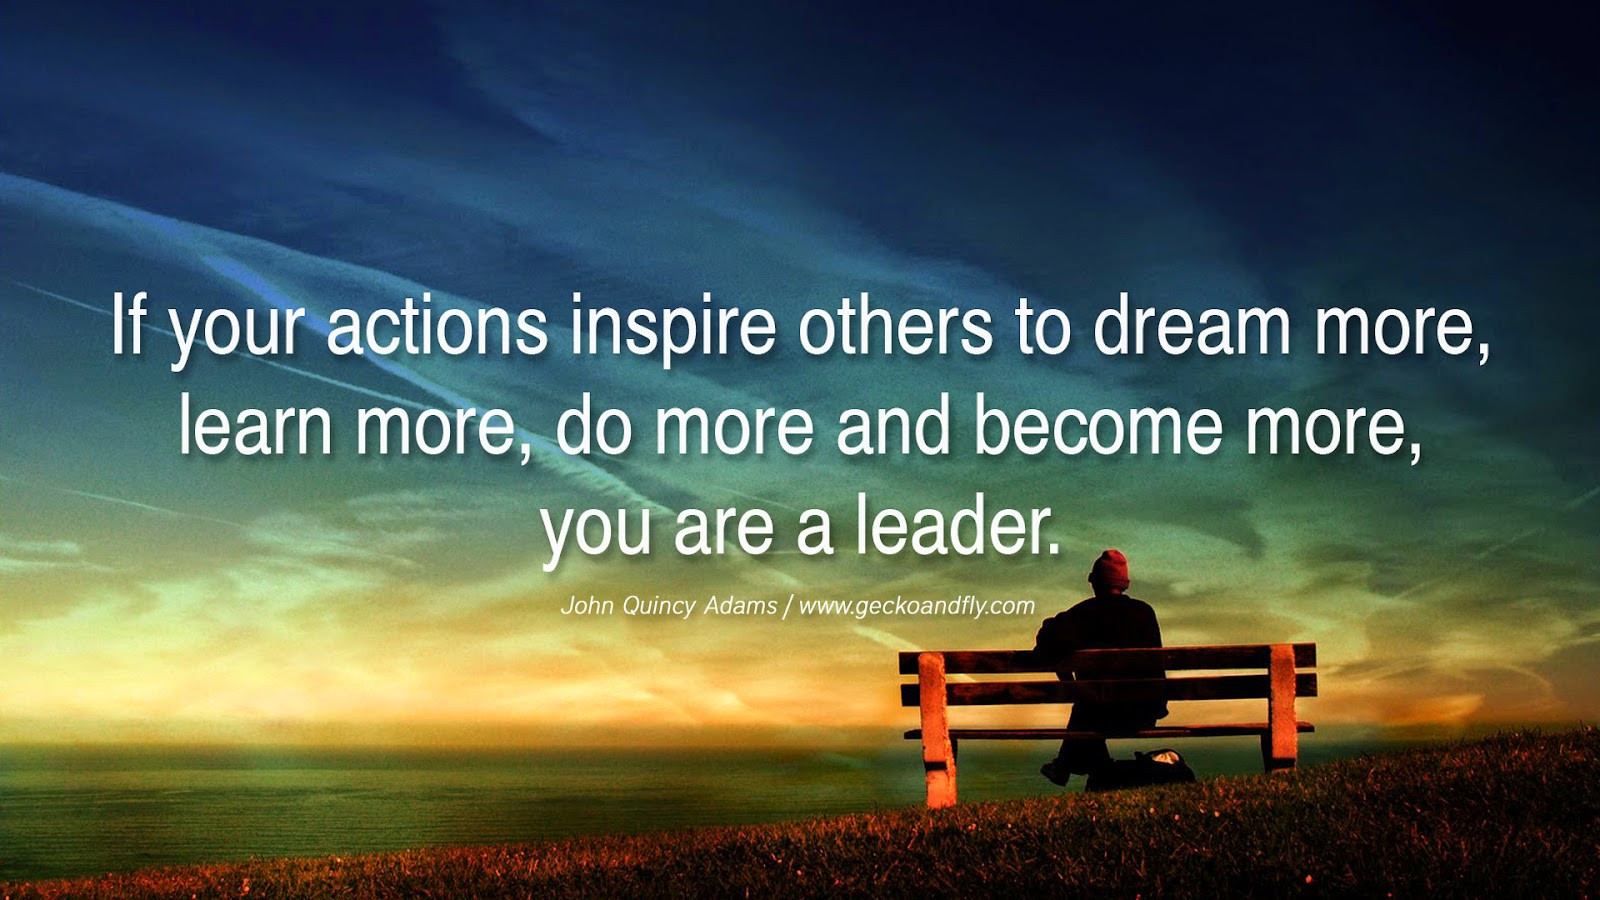 Famous Quotes About Leadership
 Leadership Quotes And Sayings By Famous People And Authors